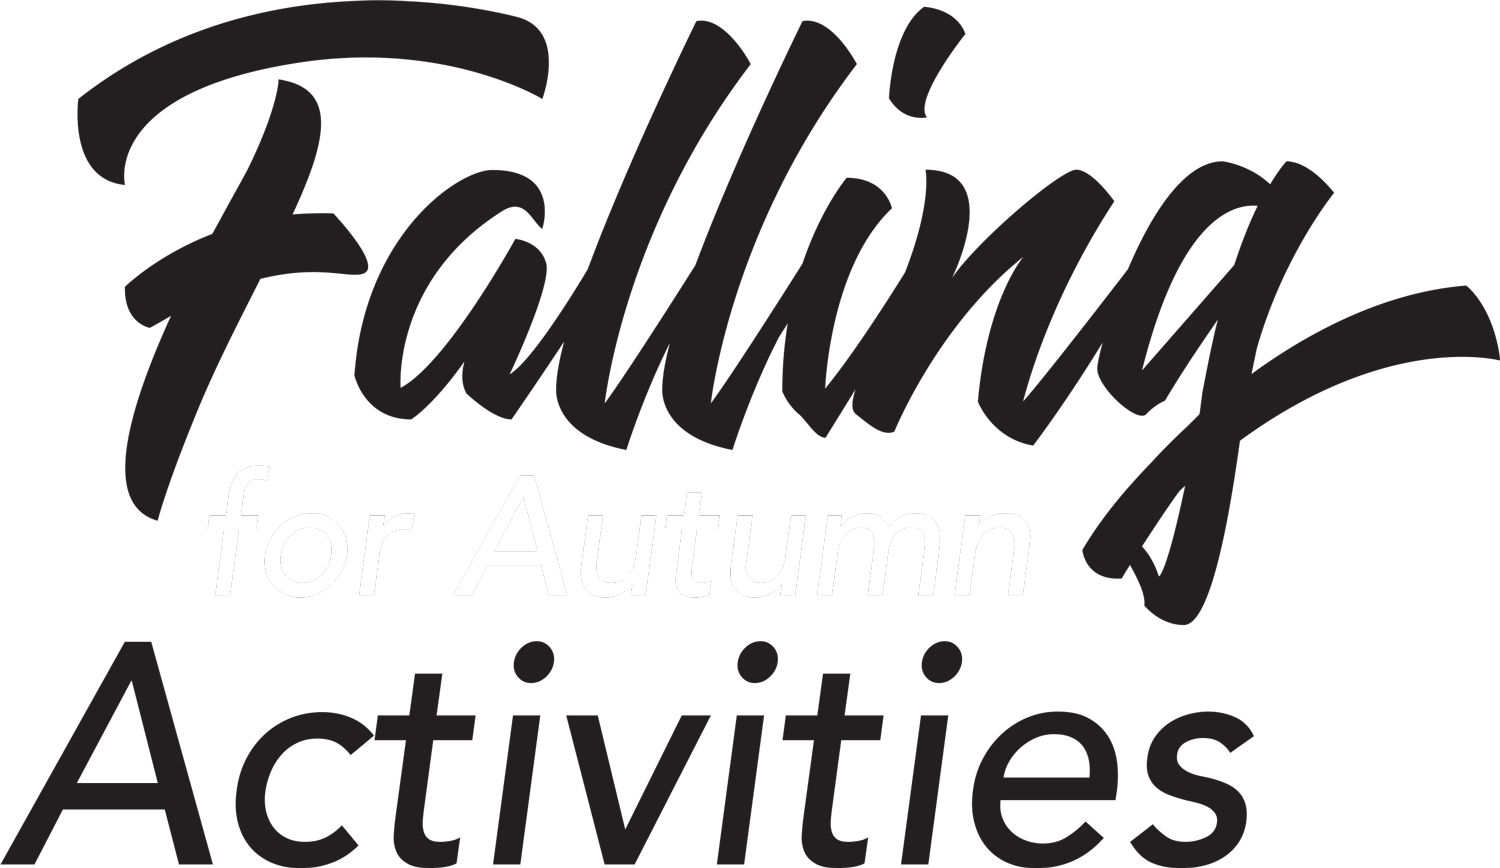 Falling for autumn activities title